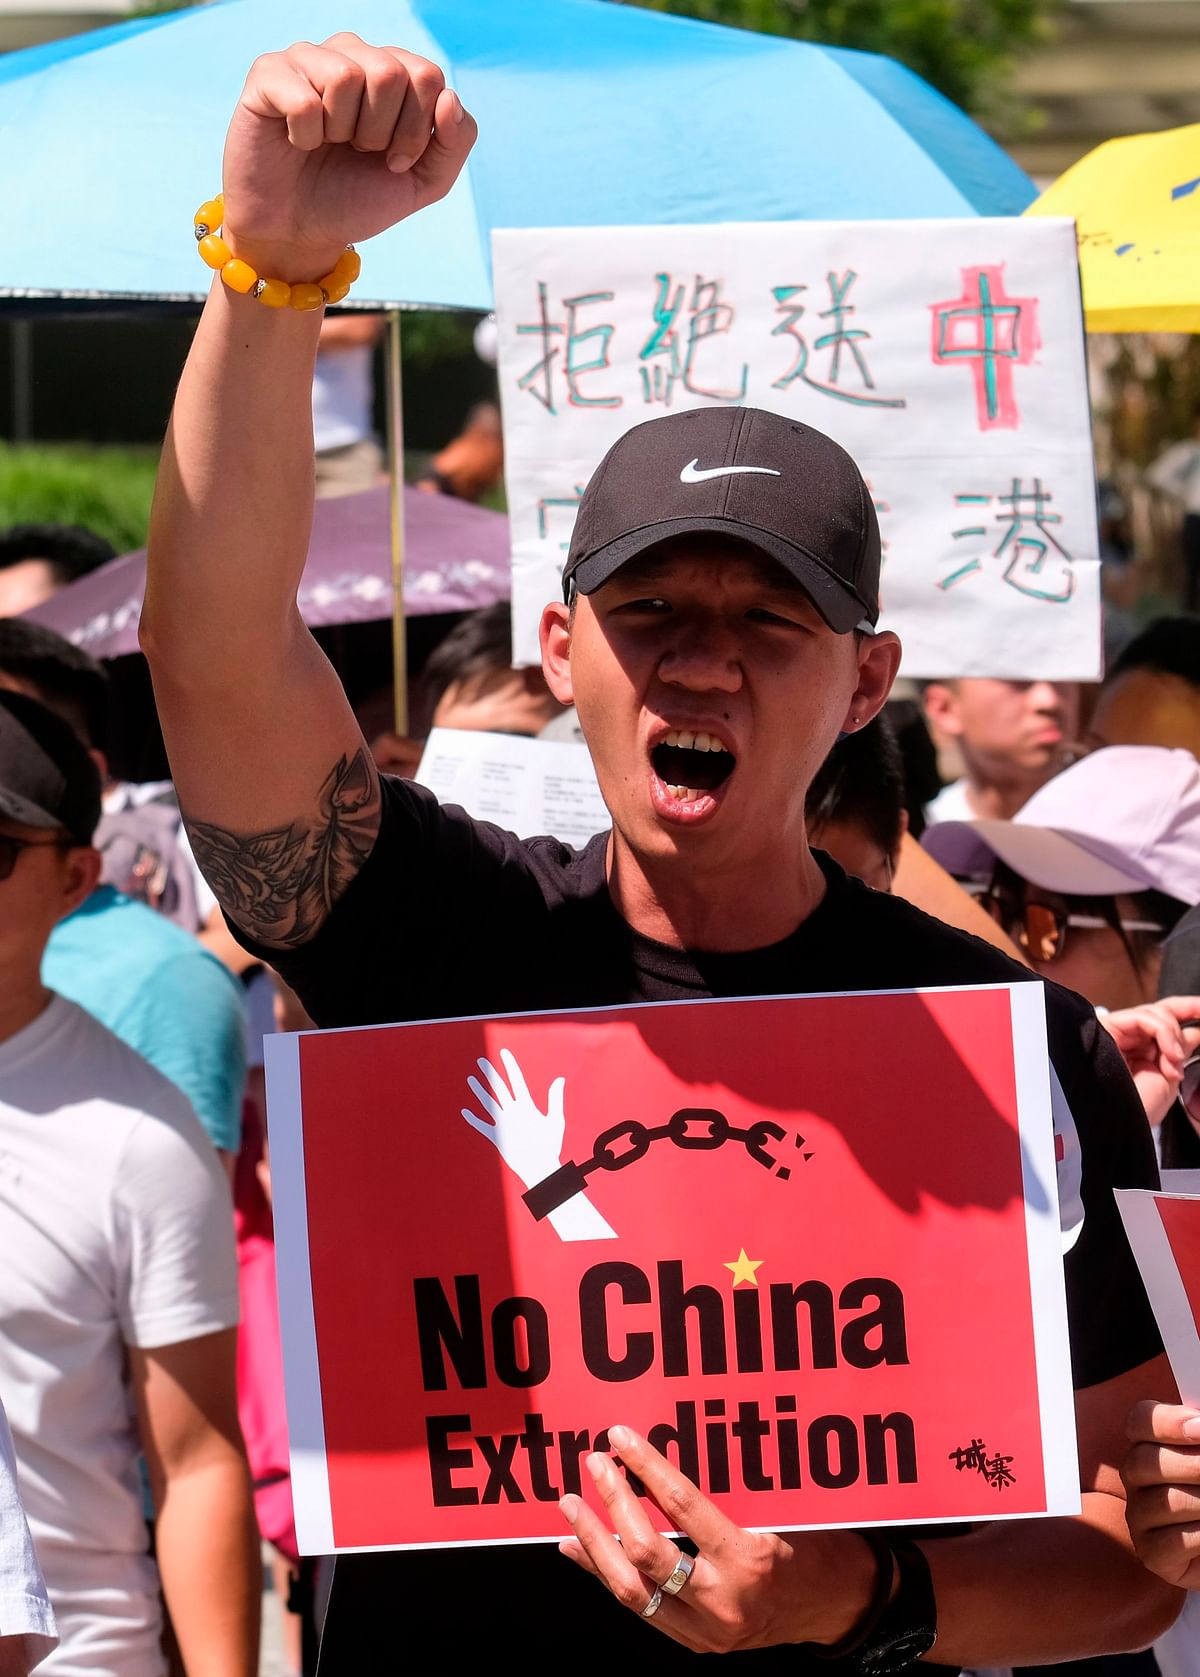 Protesters march during a demonstration to protest against a controversial extradition law proposed by Hong Kong`s pro-Beijing government to ease extraditions to China, in Los Angeles on 9 June 2019. Photo: AFP